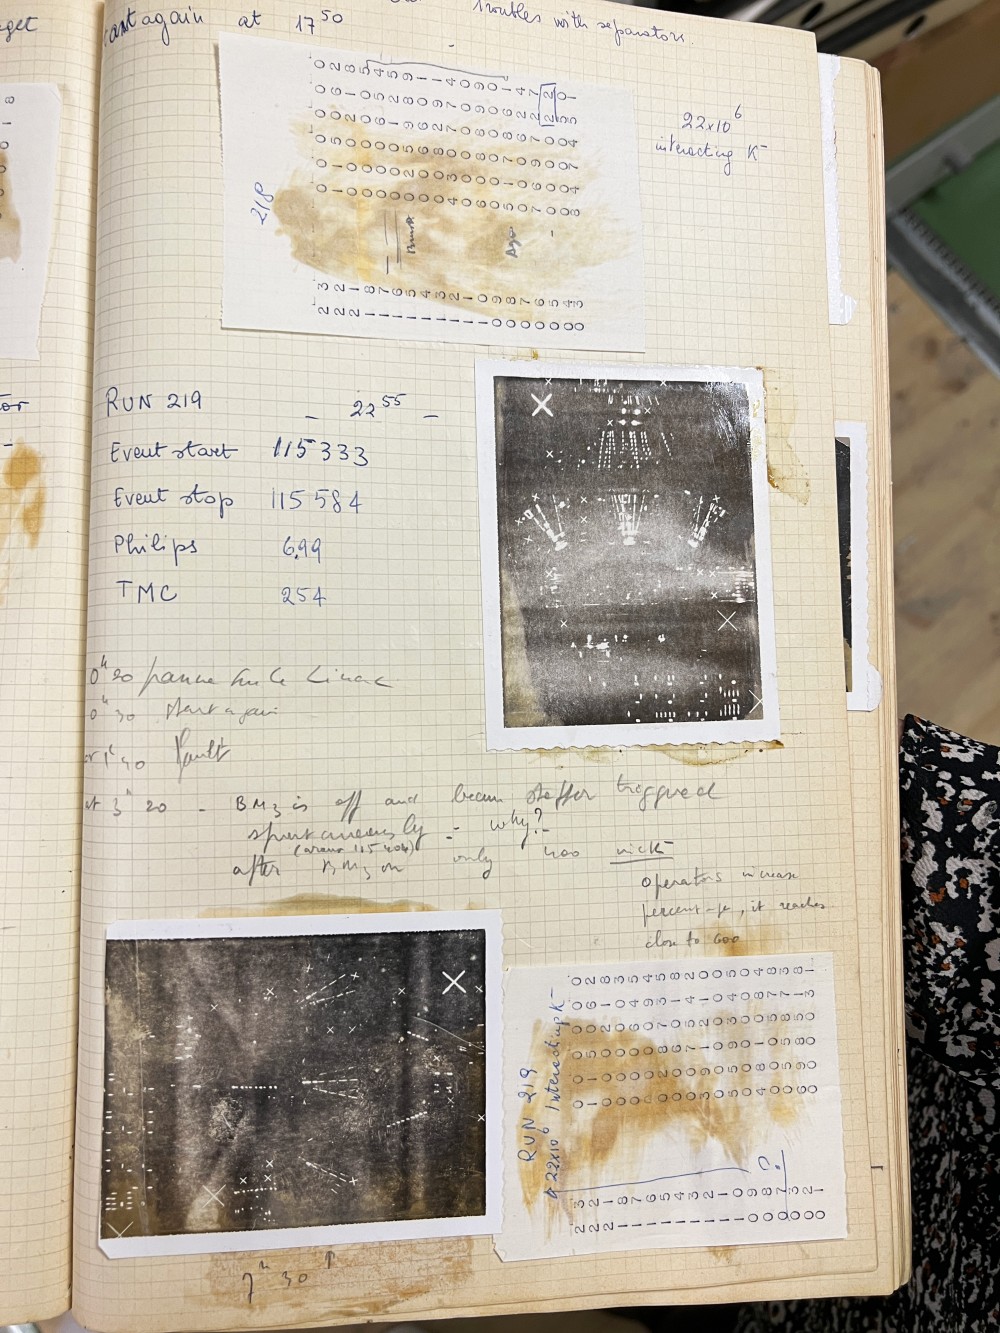 A research notebook in the CERN's archives. Photo by Tania Candiani